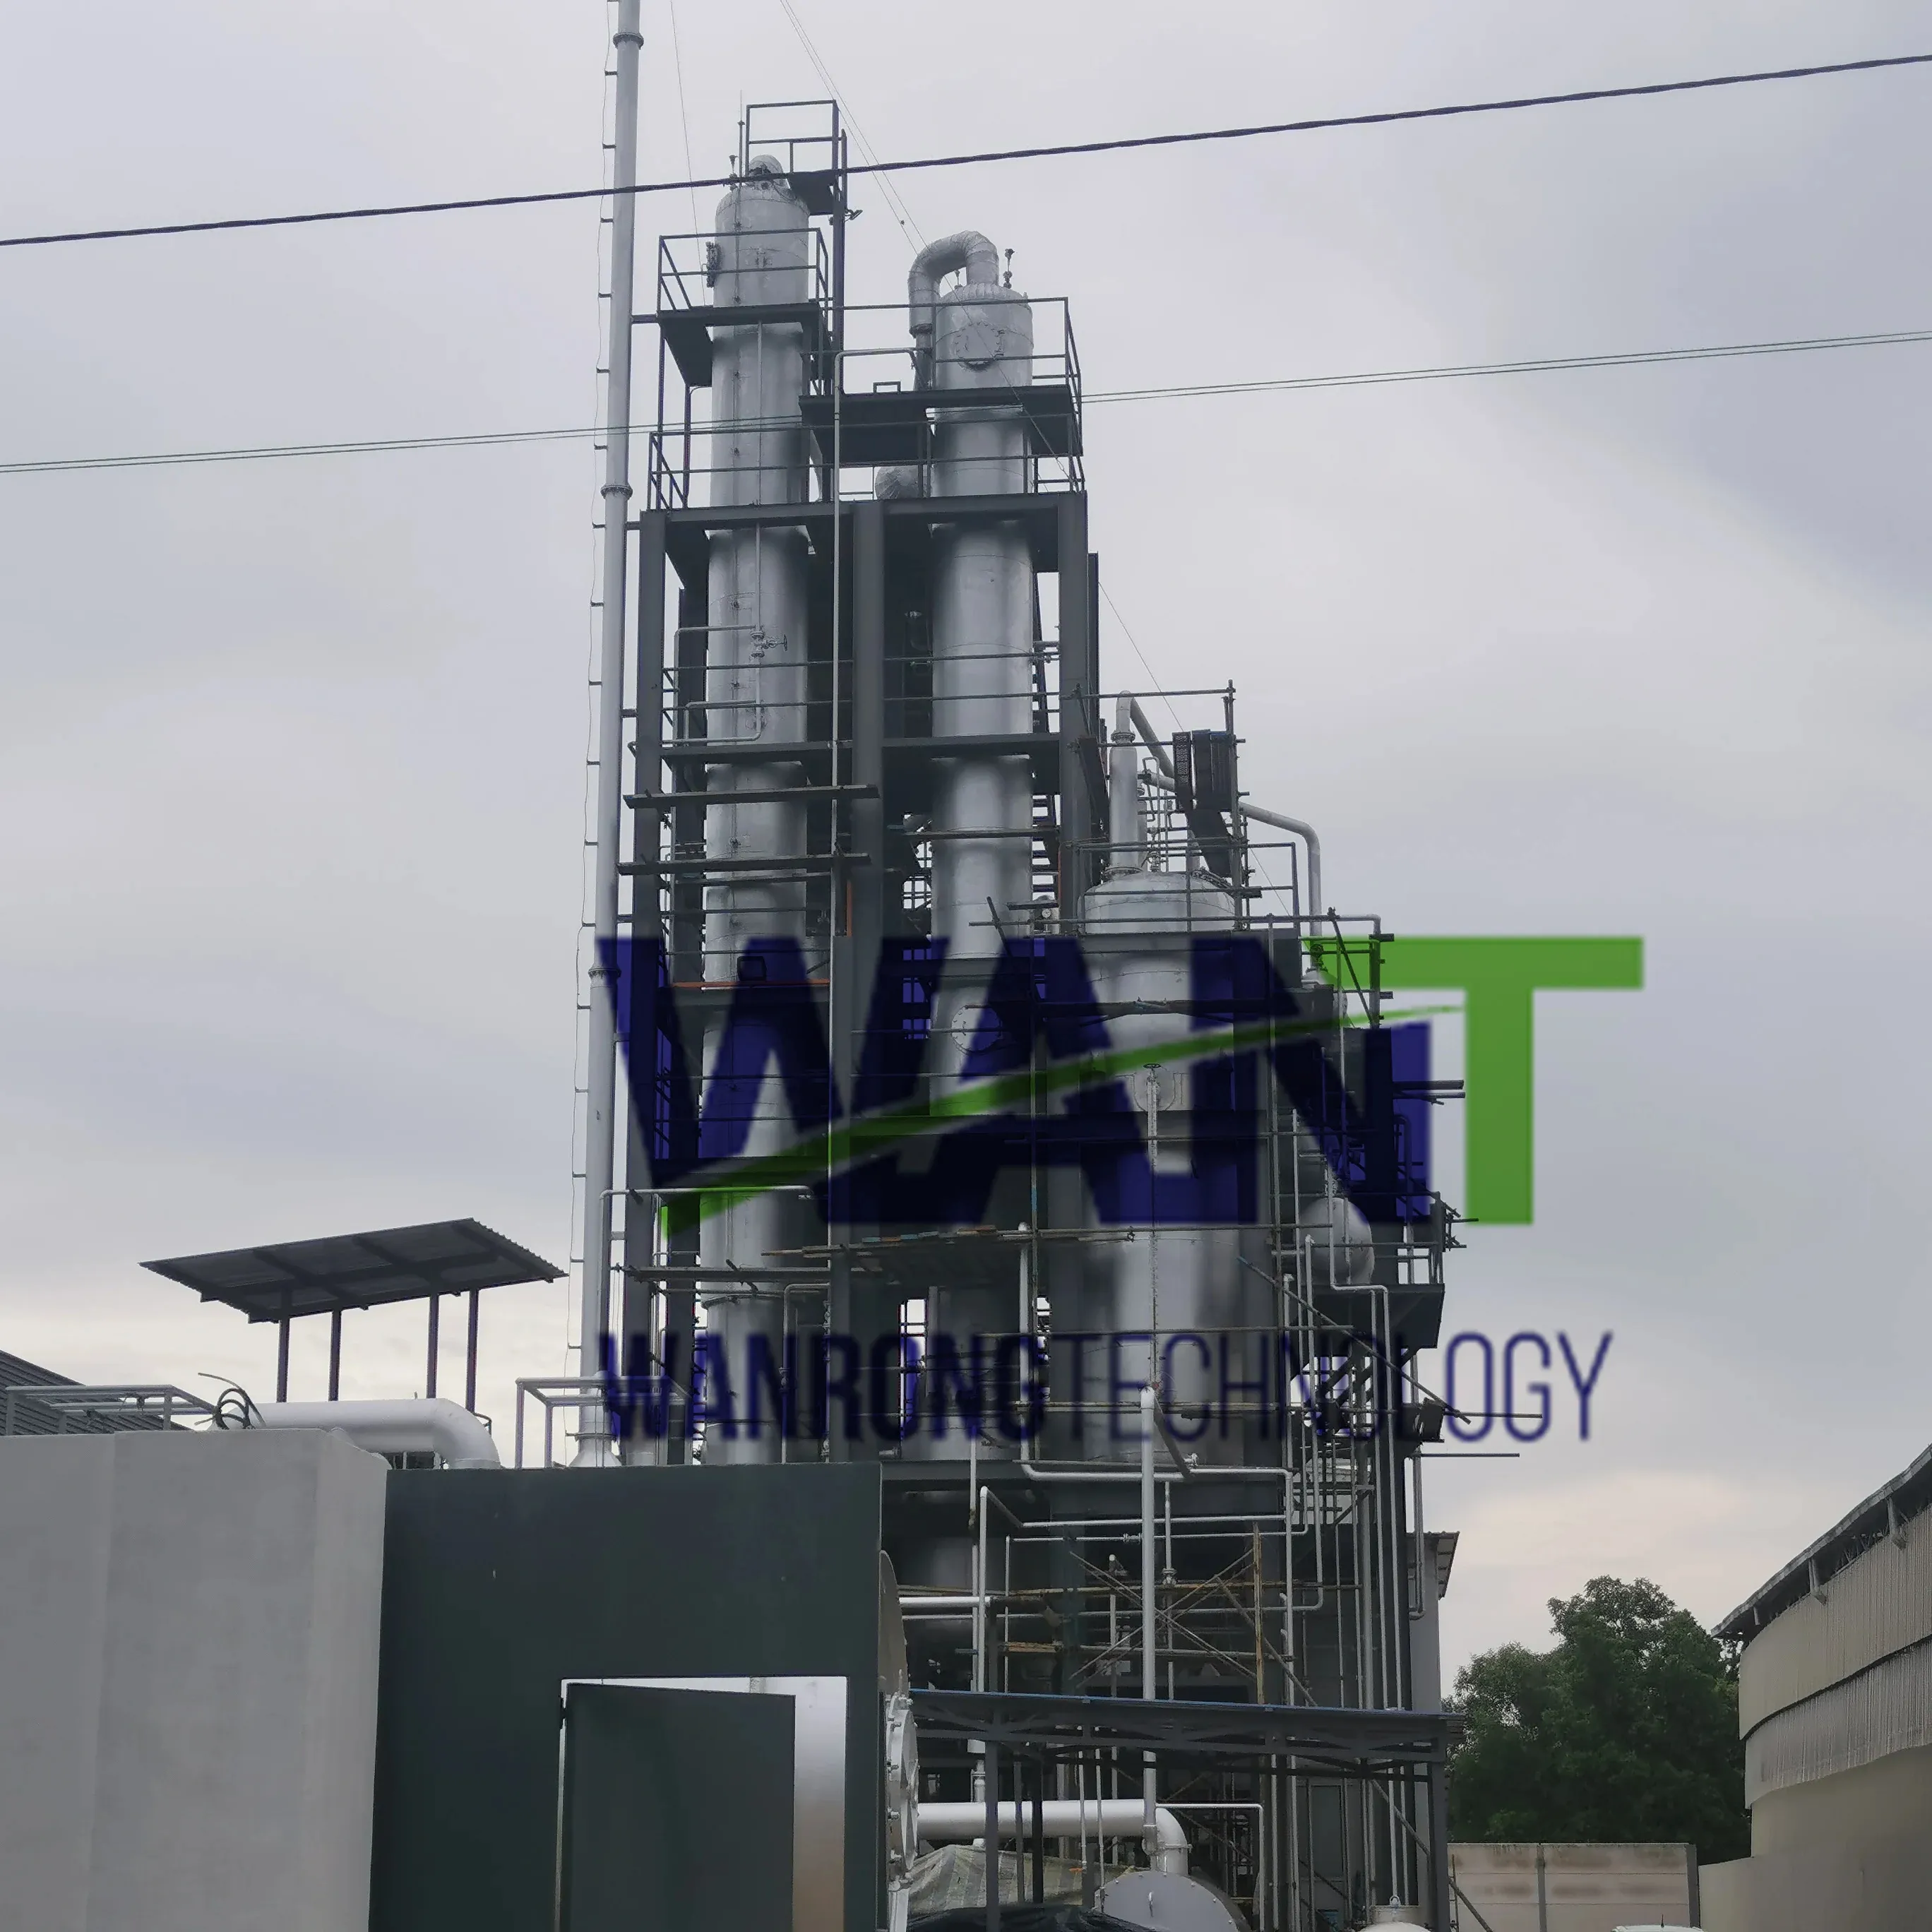 Wanrong patent product waste engine oil used oil recycling diesel and base oil distillation equipment